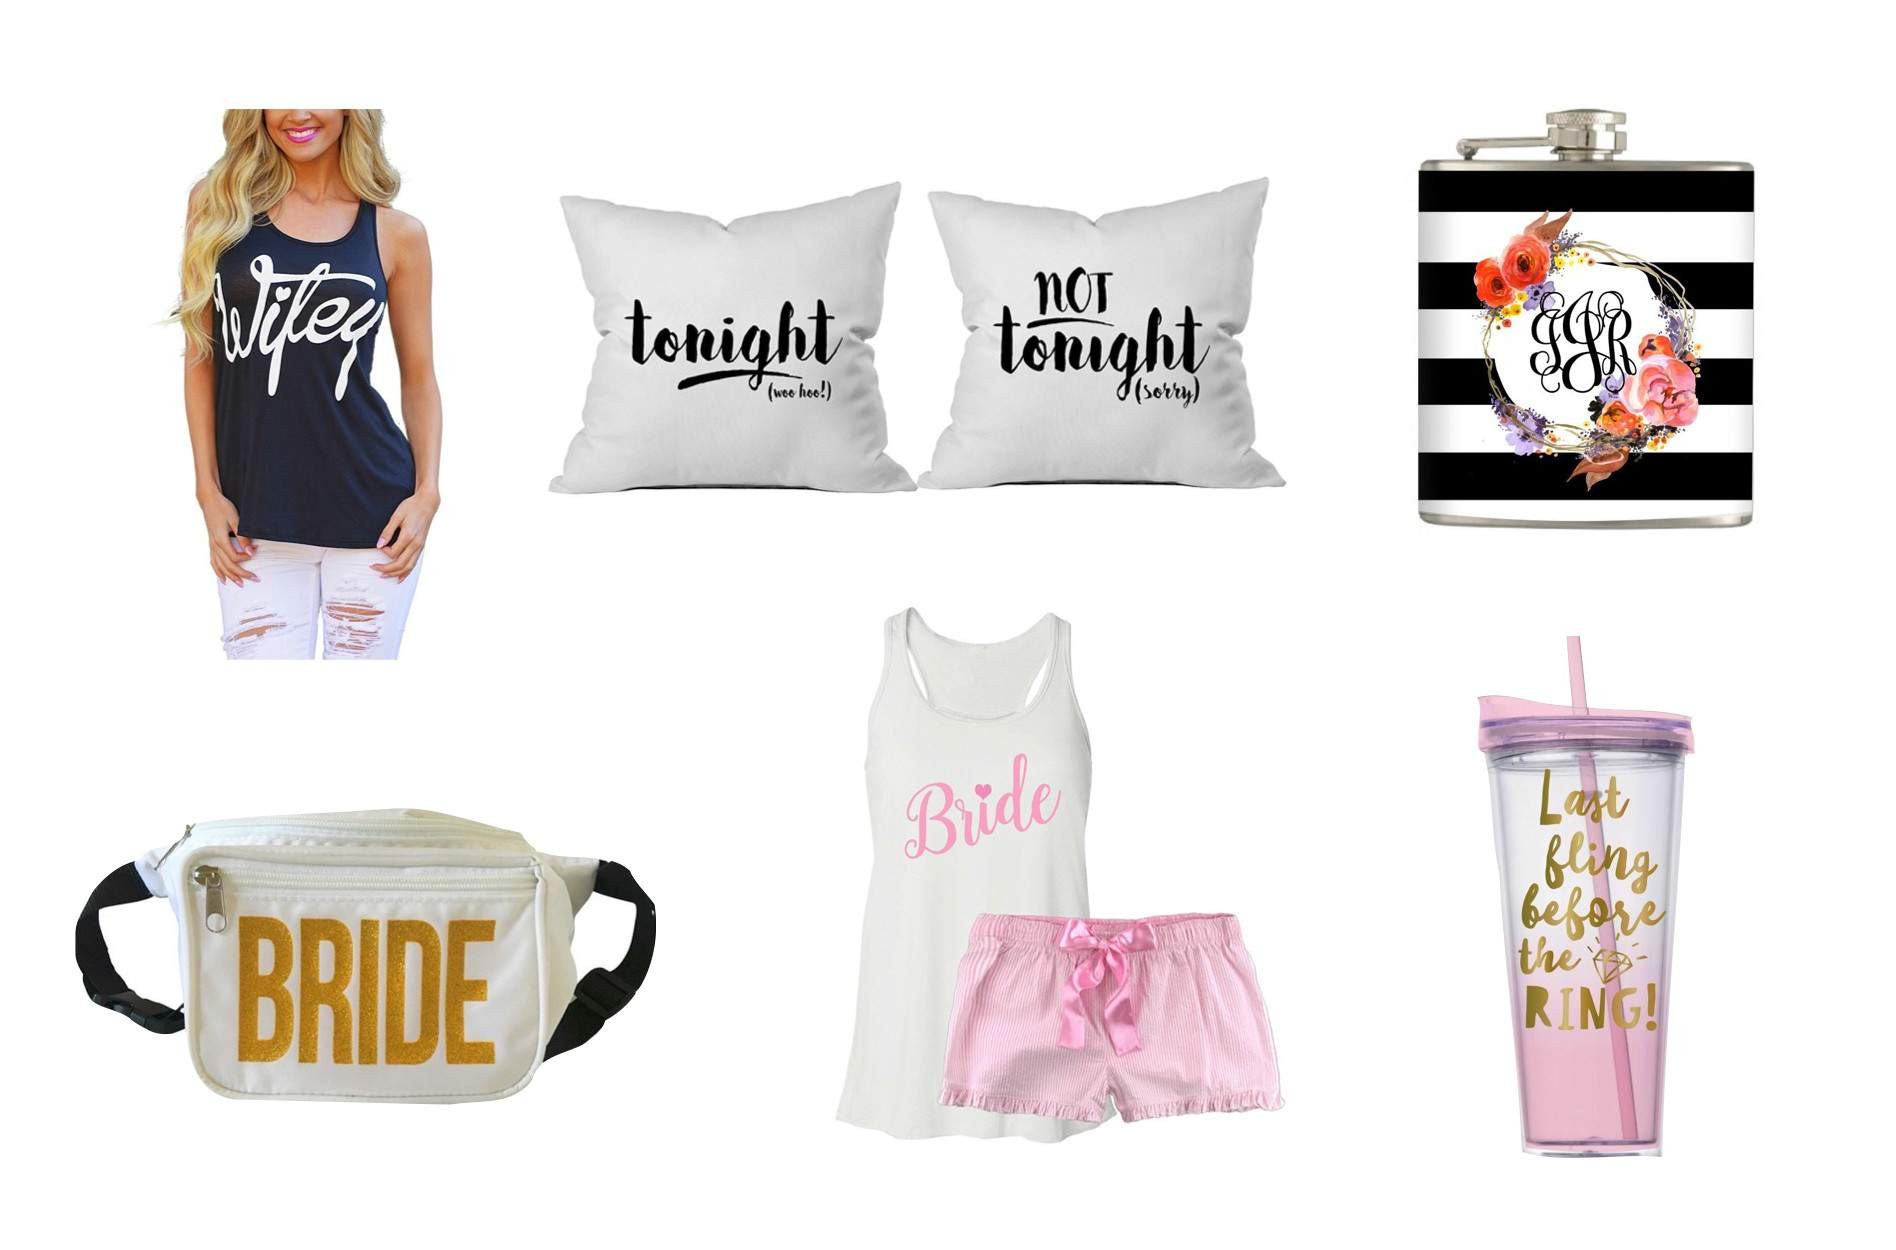 Gift Ideas For Bachelorette Party For Bride
 Top 10 Best Bachelorette Party Gifts